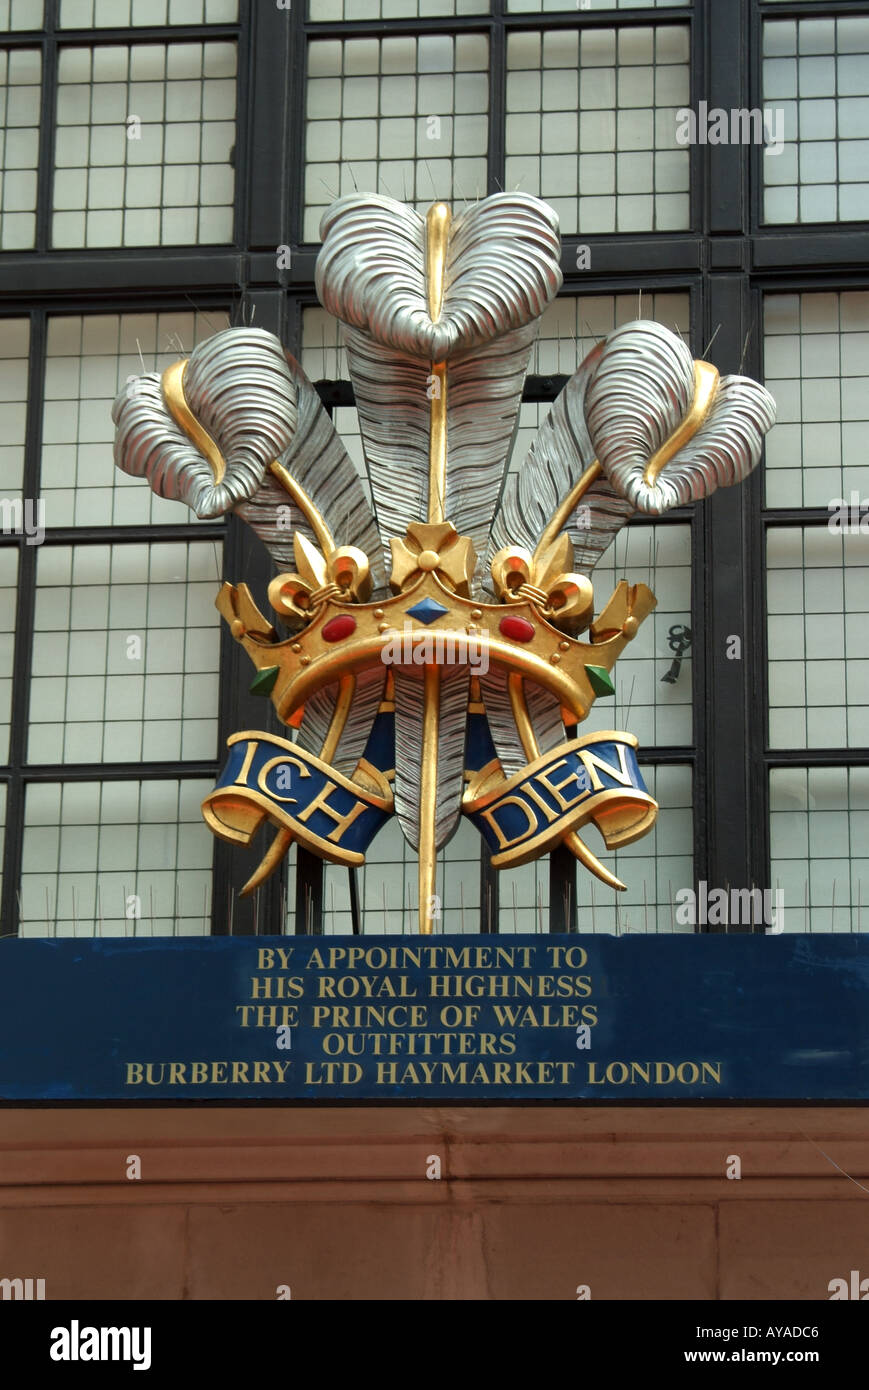 Haymarket London Royal Warrant crest over Burberry store for outfitters to  the Prince of Wales Stock Photo - Alamy